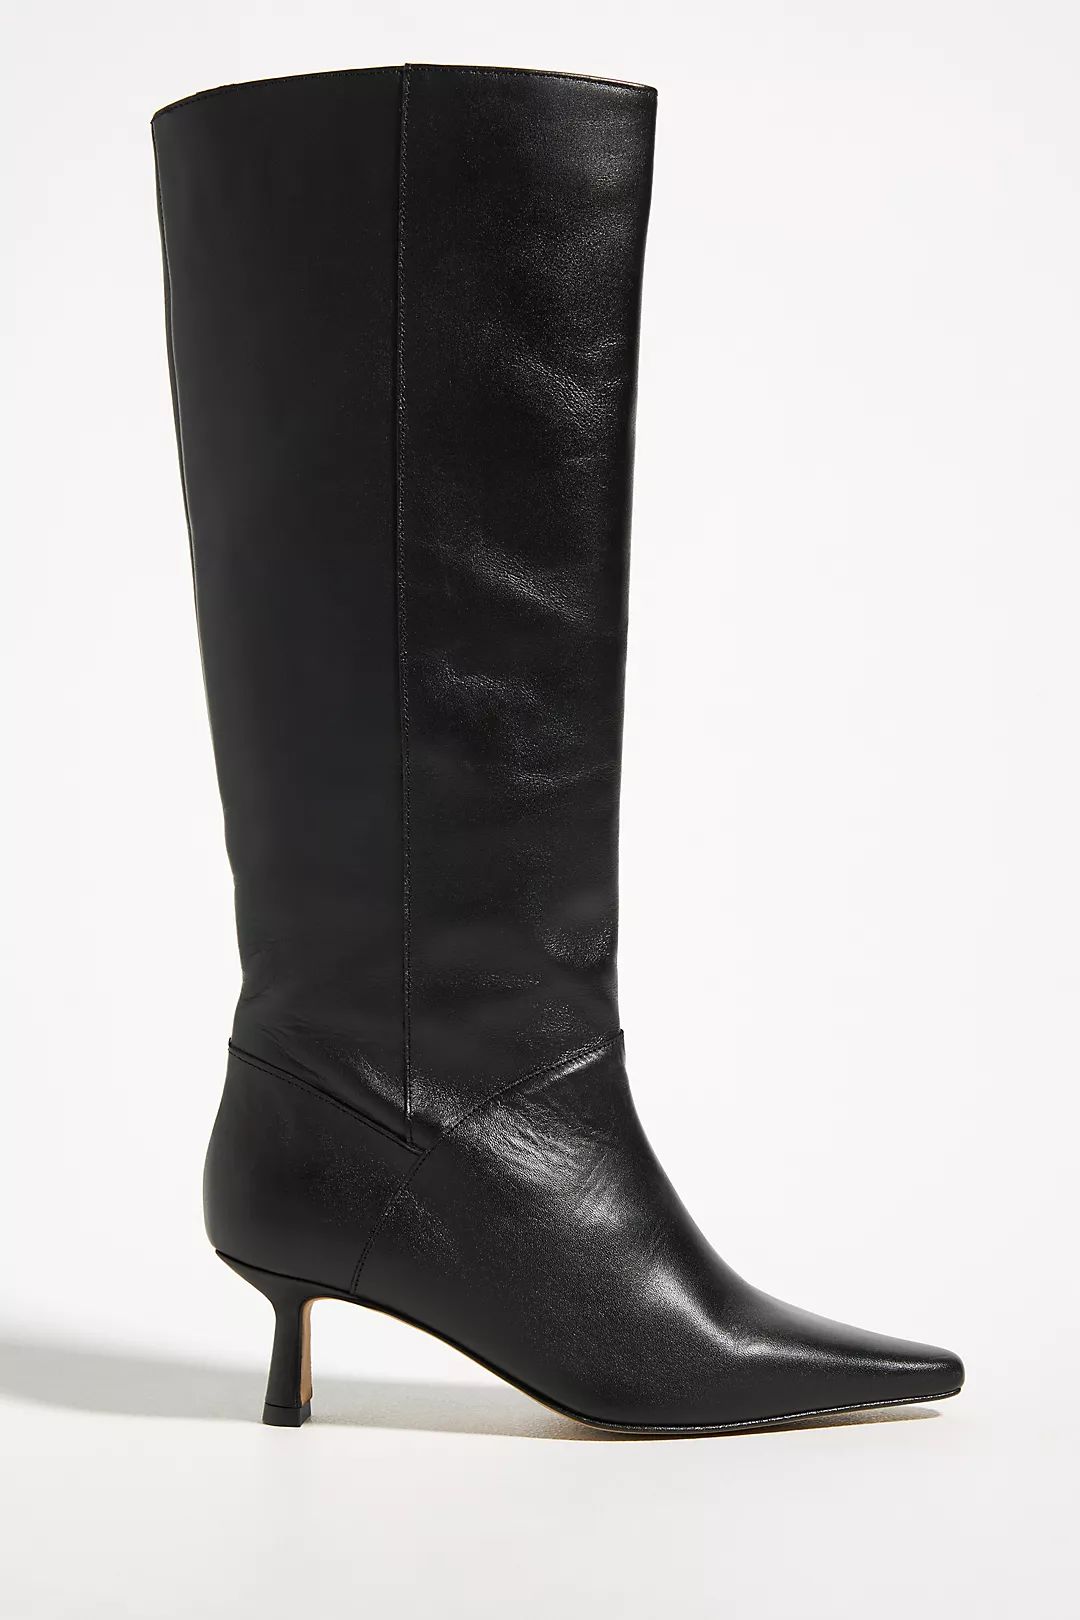 By Anthropologie Knee-High Pointed-Toe Boots | Anthropologie (US)